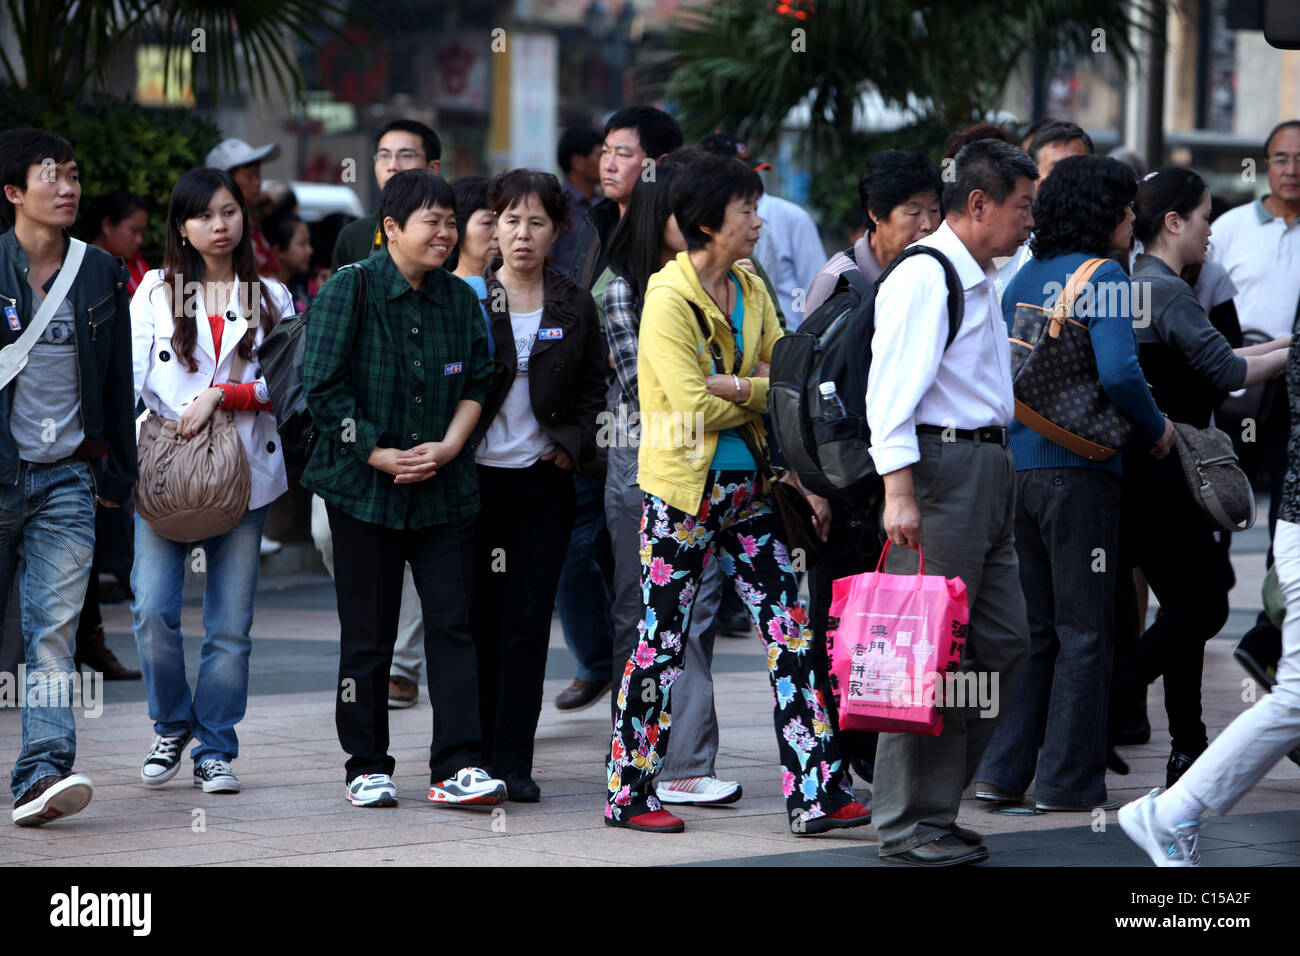 Chinese tourists near by the casinos in macau, Macao Stock Photo